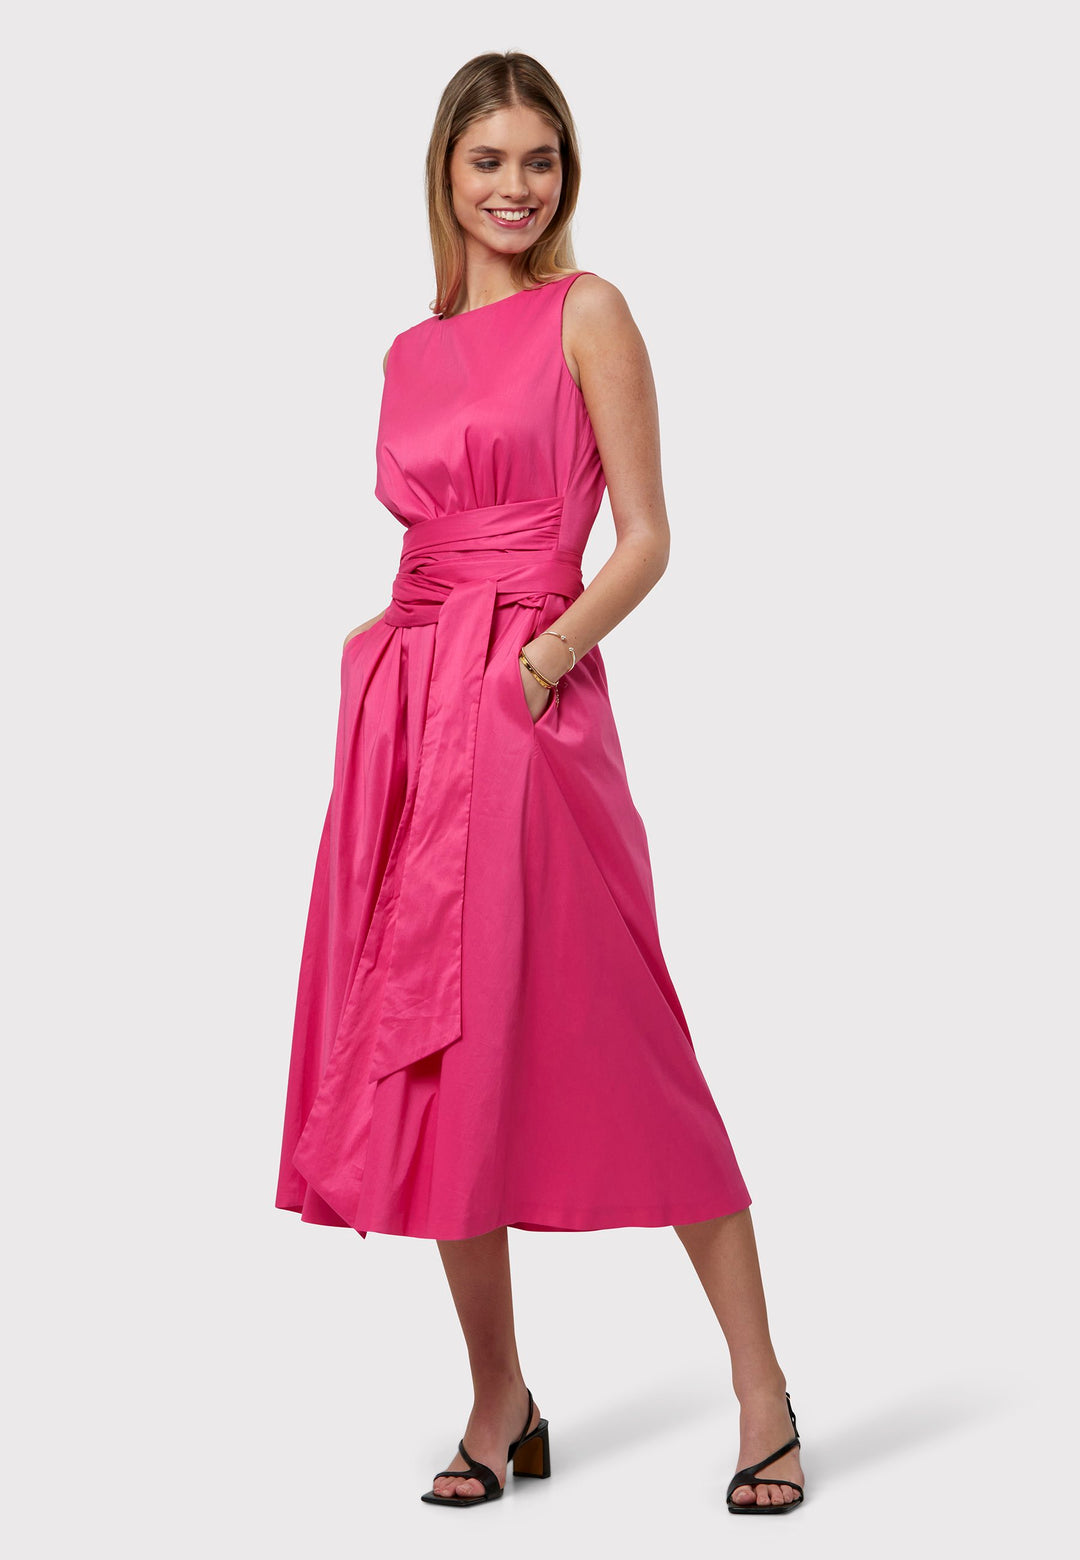 Our best-selling Avril dress returns in bright pink. Elevate your summer look with an easy-fitting dress. A sleeveless silhouette featuring a defined waist and an oversized wrap tie. The flared skirt falls to the mid-calf with side seam pockets.